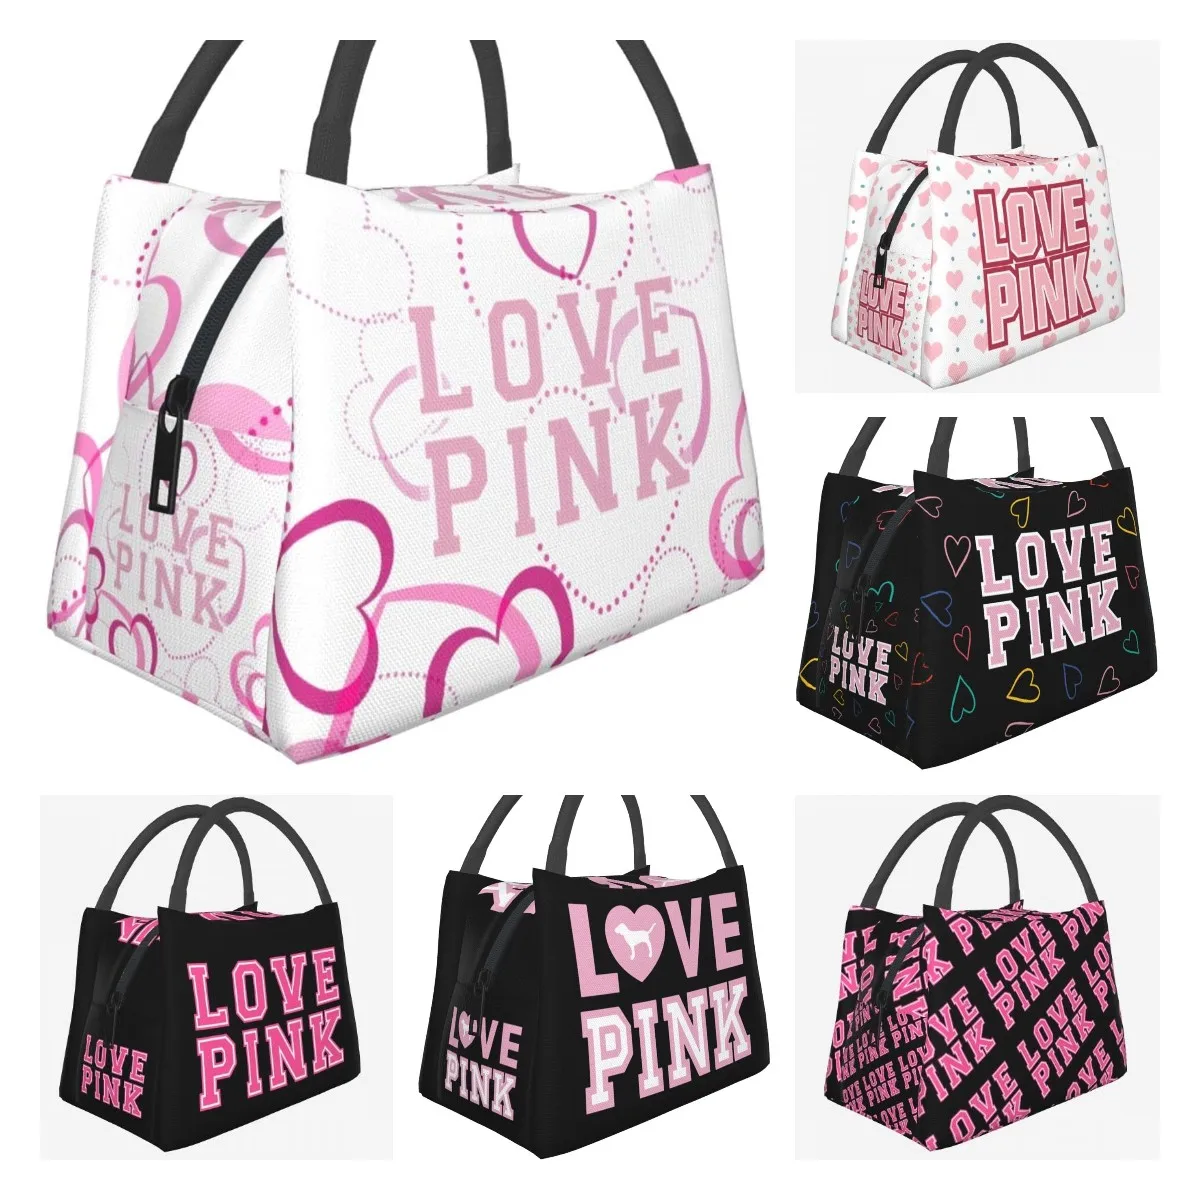 Love Pink Heart Women Secert Insulated Lunch Bag Reusable Water-Resistant Bento Tote Box Portable Lunch Bags 100pcs 50pcs 7x7cm plastic transparent heart bags for diy jewelry candy cookie gift self adhesive pouch storage packaging bags